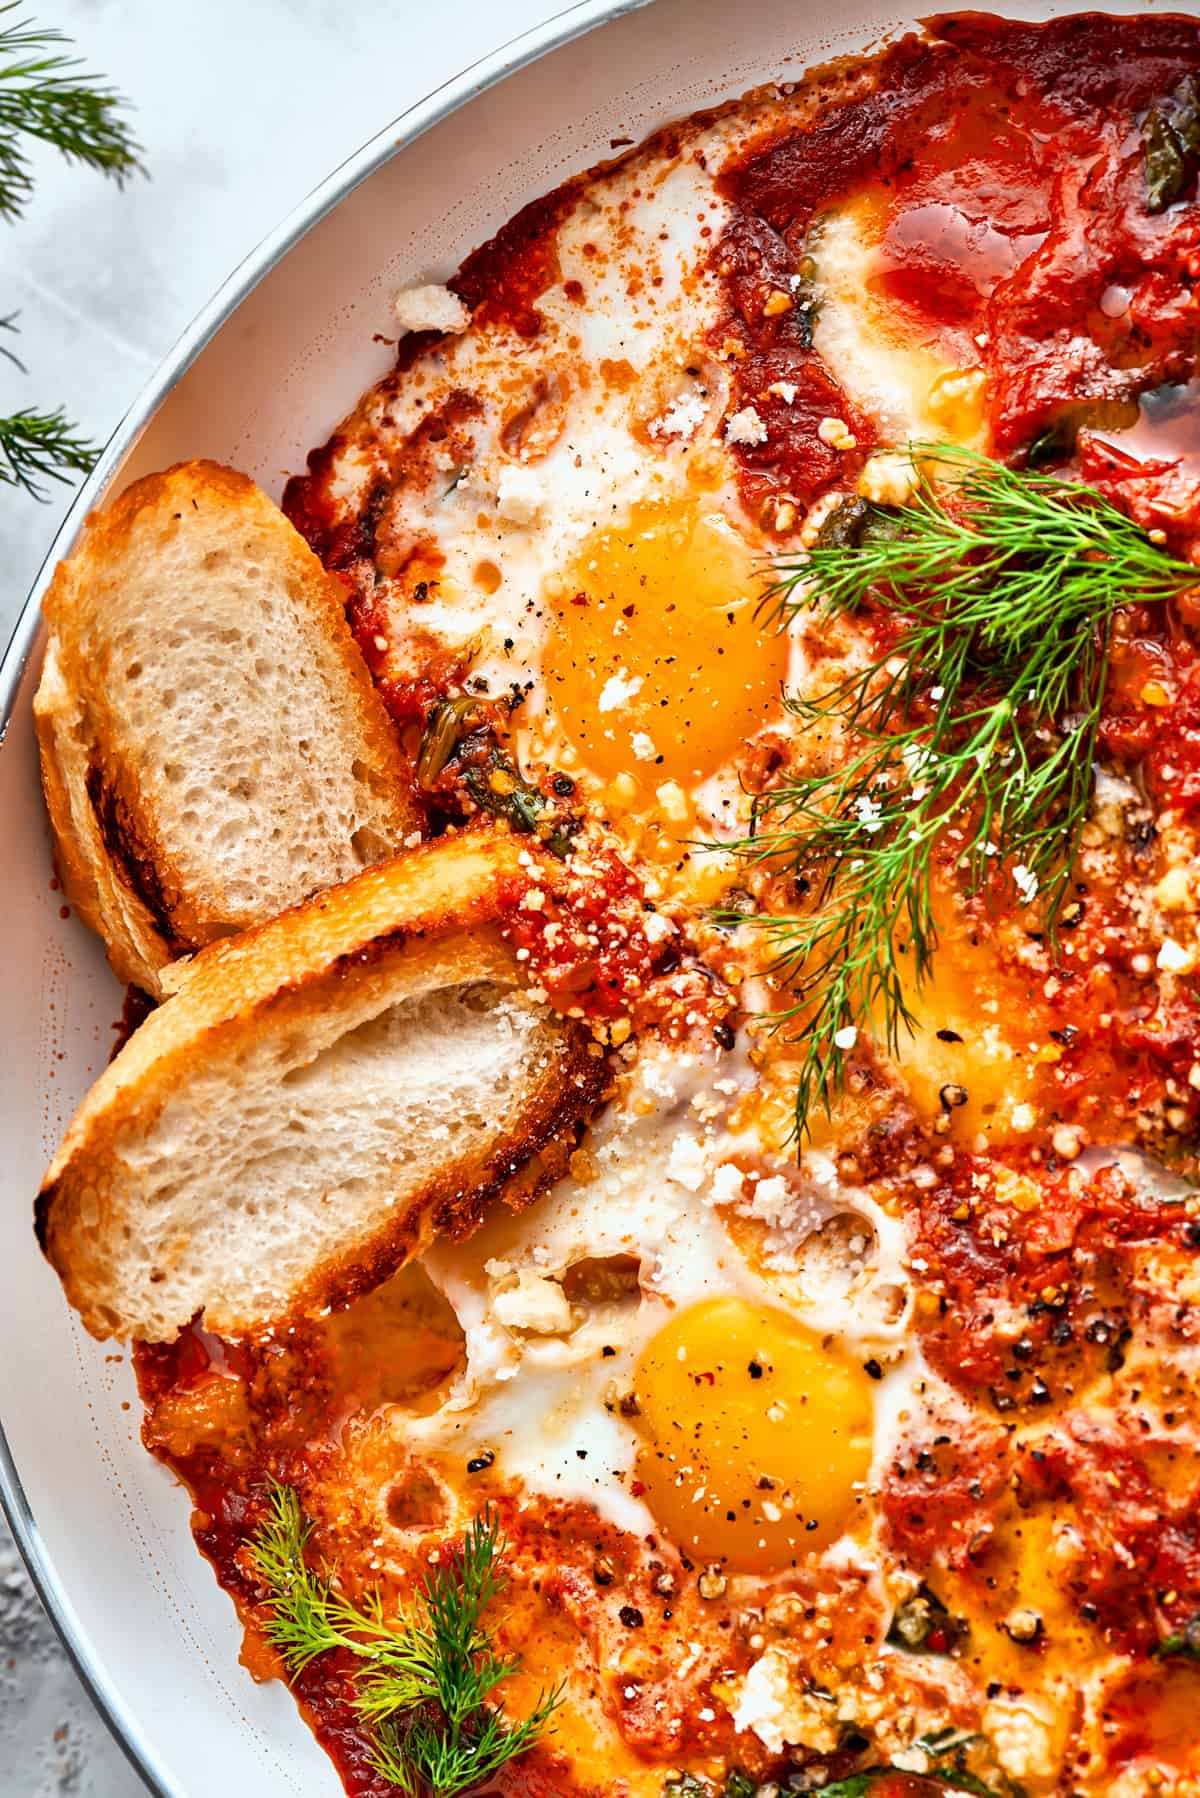 Up close image of two slices of bread resting in the sauce of eggs in purgatory.